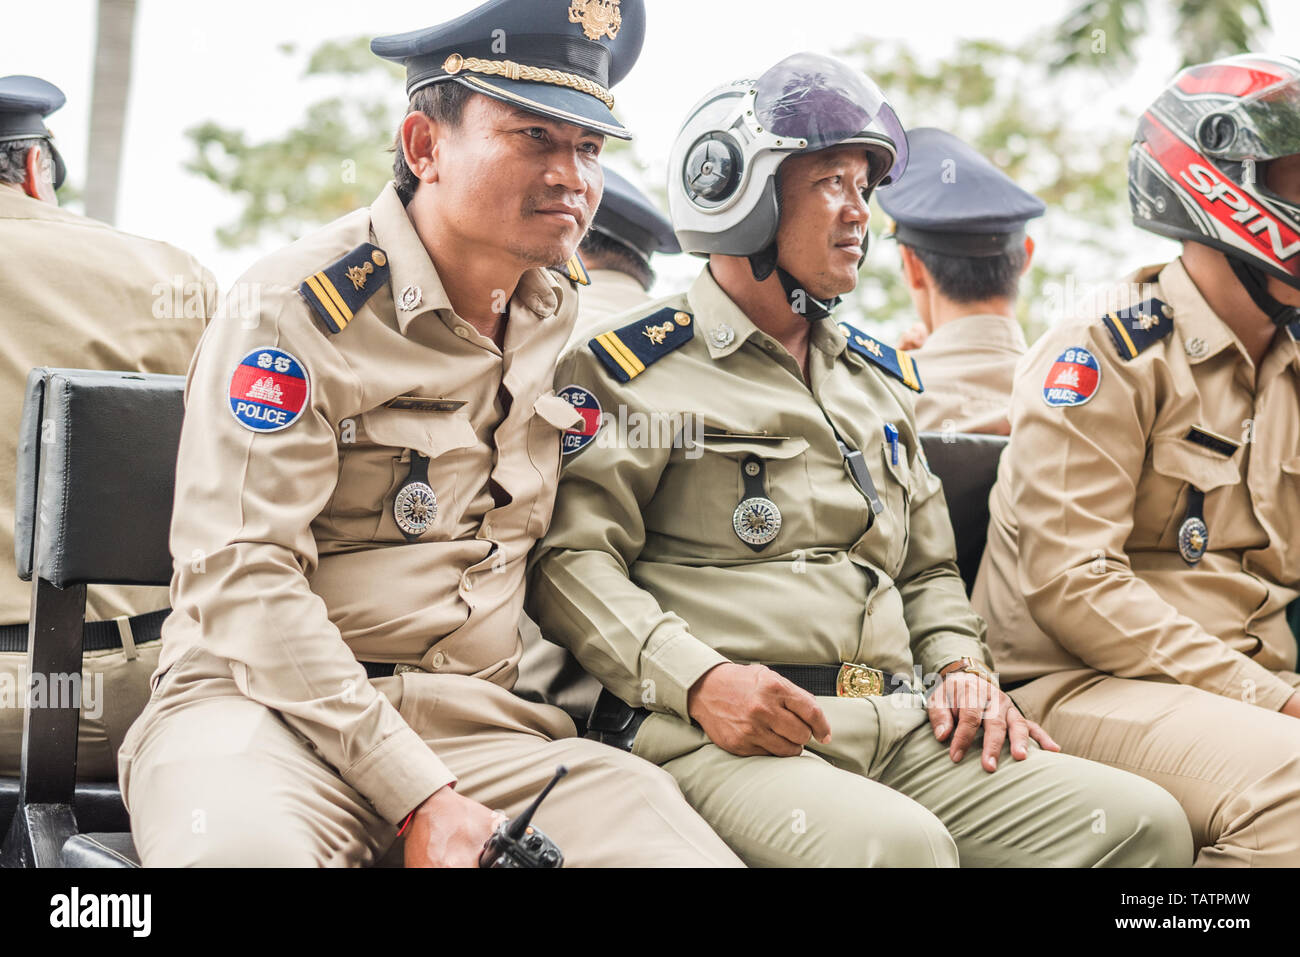 Phnom Penh, Cambodia - January 17, 2019: a group of Cambodian policemen sits on the bench in the pickup's body. Stock Photo